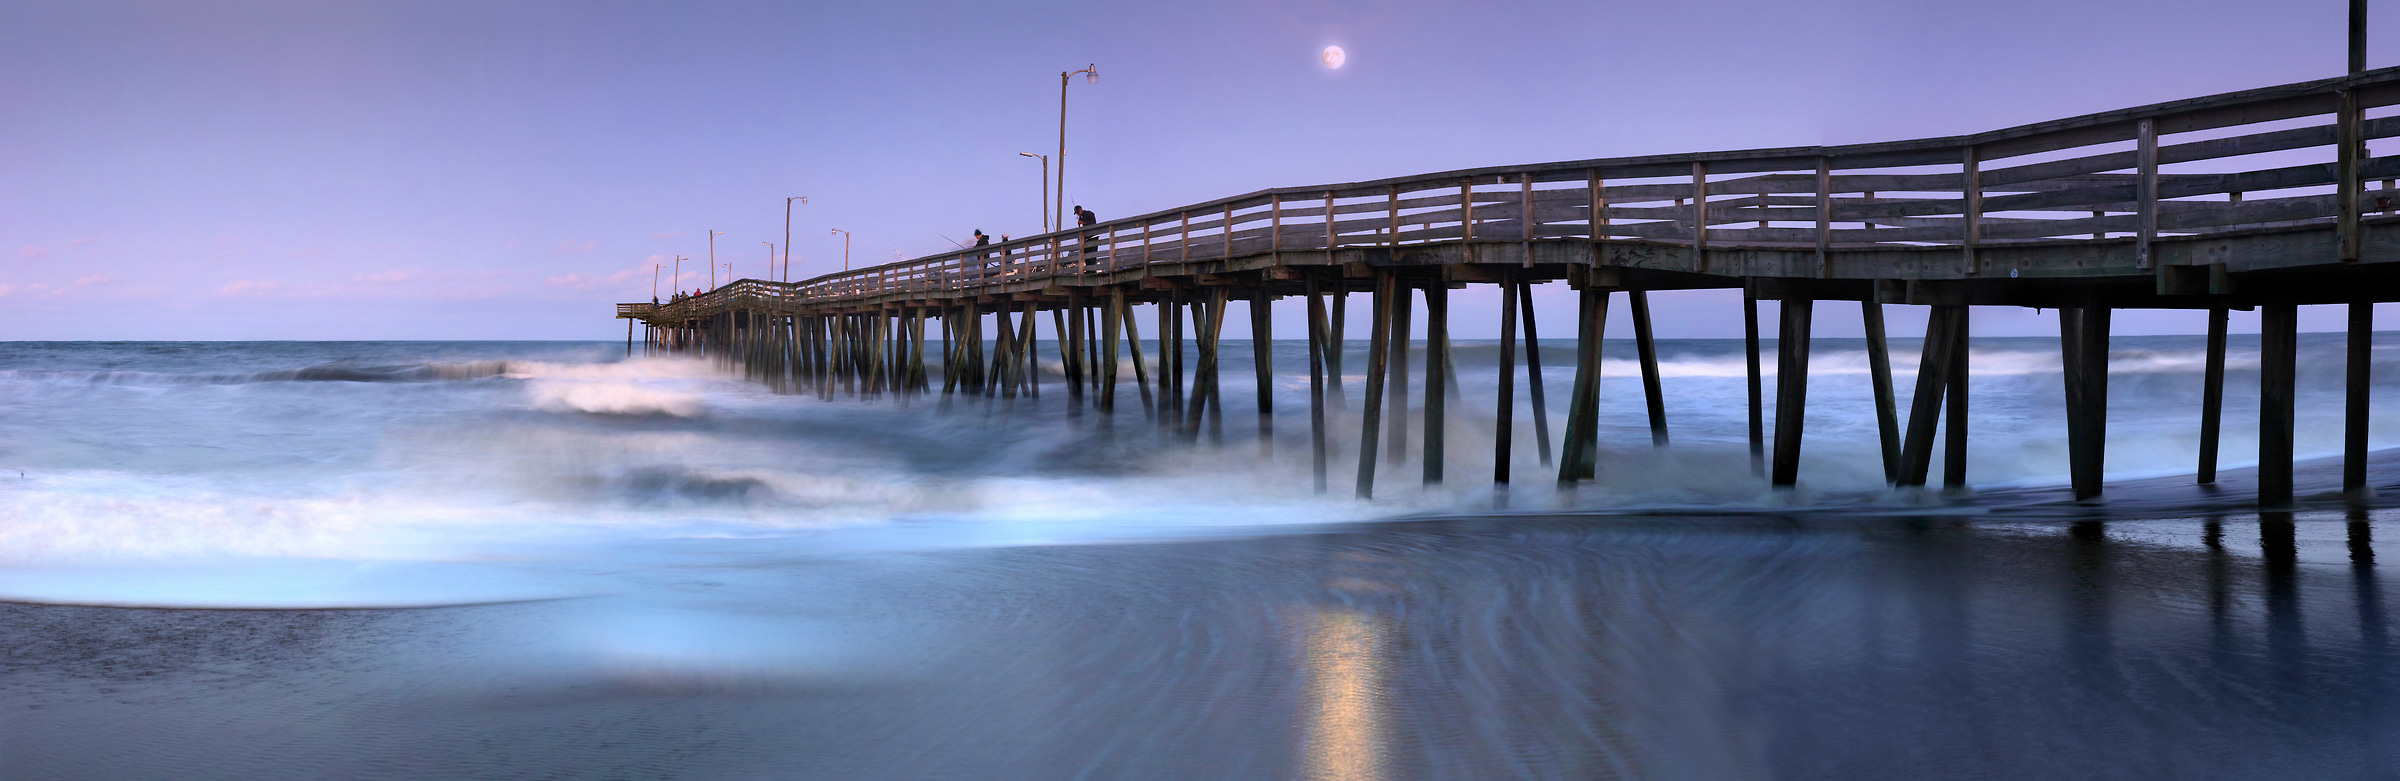 293 megapixels! A very high resolution, large-format VAST photo print of a pier on the beach at dusk with the moon in the background; photograph created by Phil Crawshay in Virginia Beach Pier, Virginia.